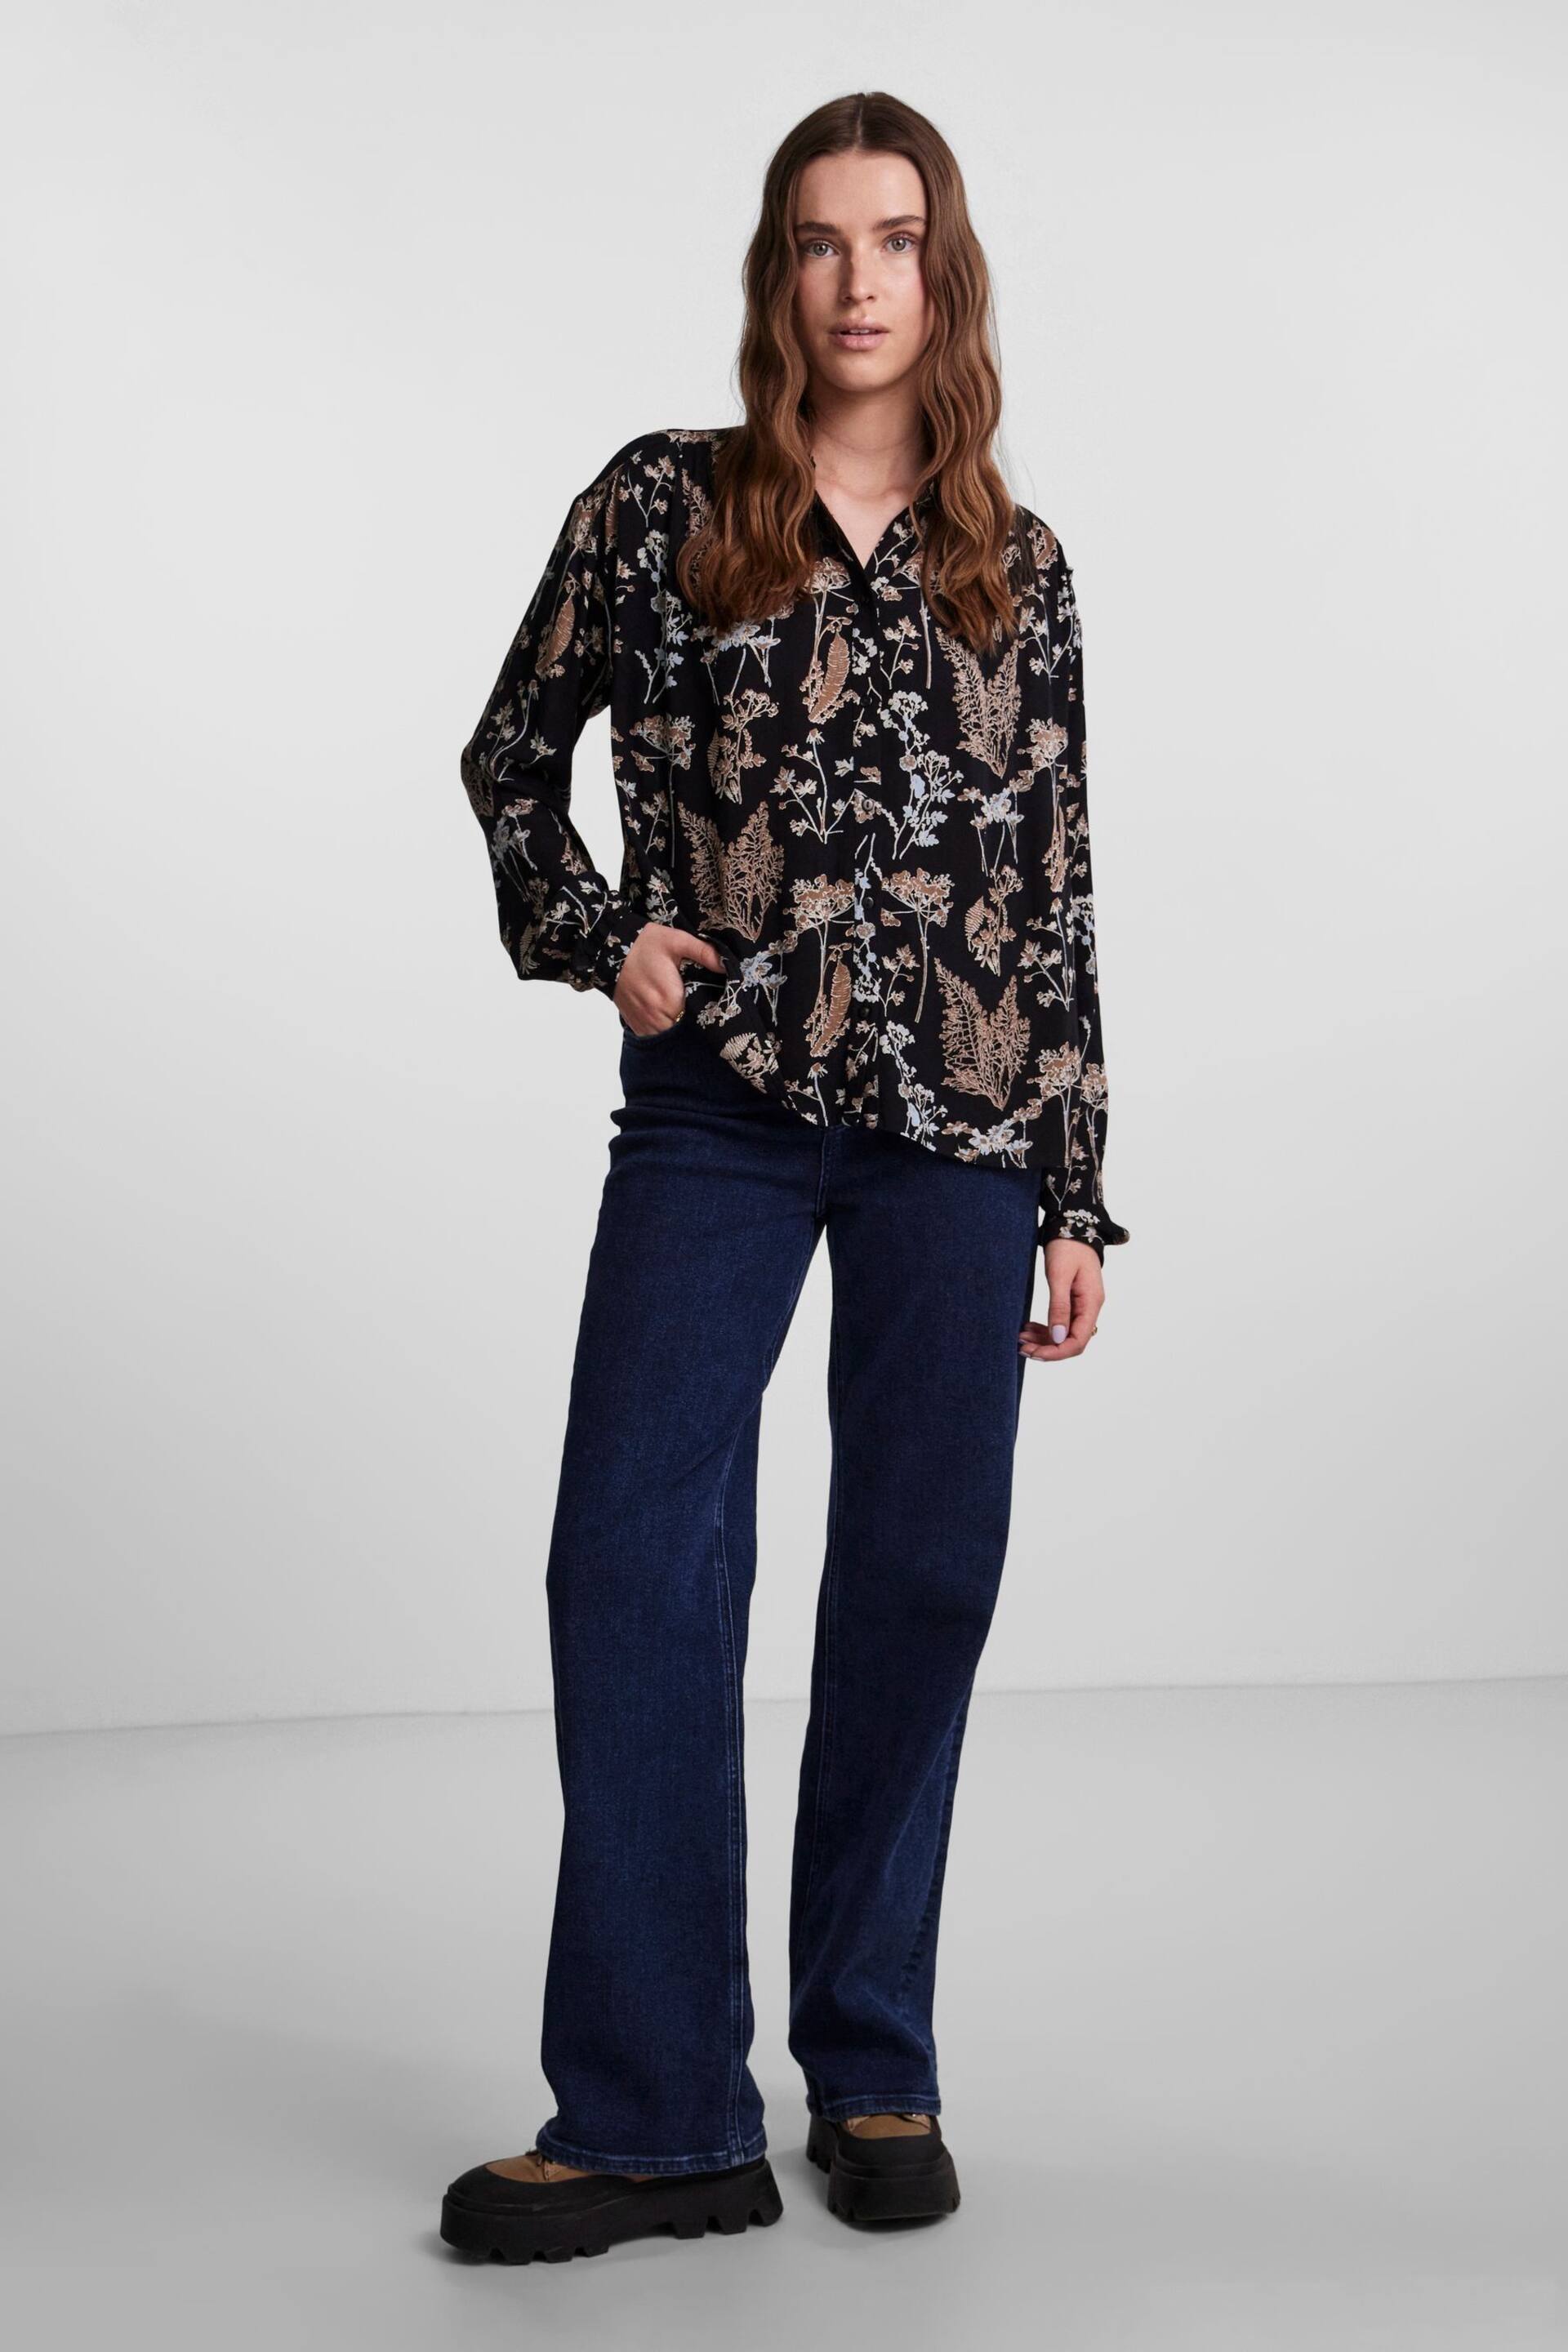 PIECES Black Printed Long Sleeve Blouse - Image 3 of 5